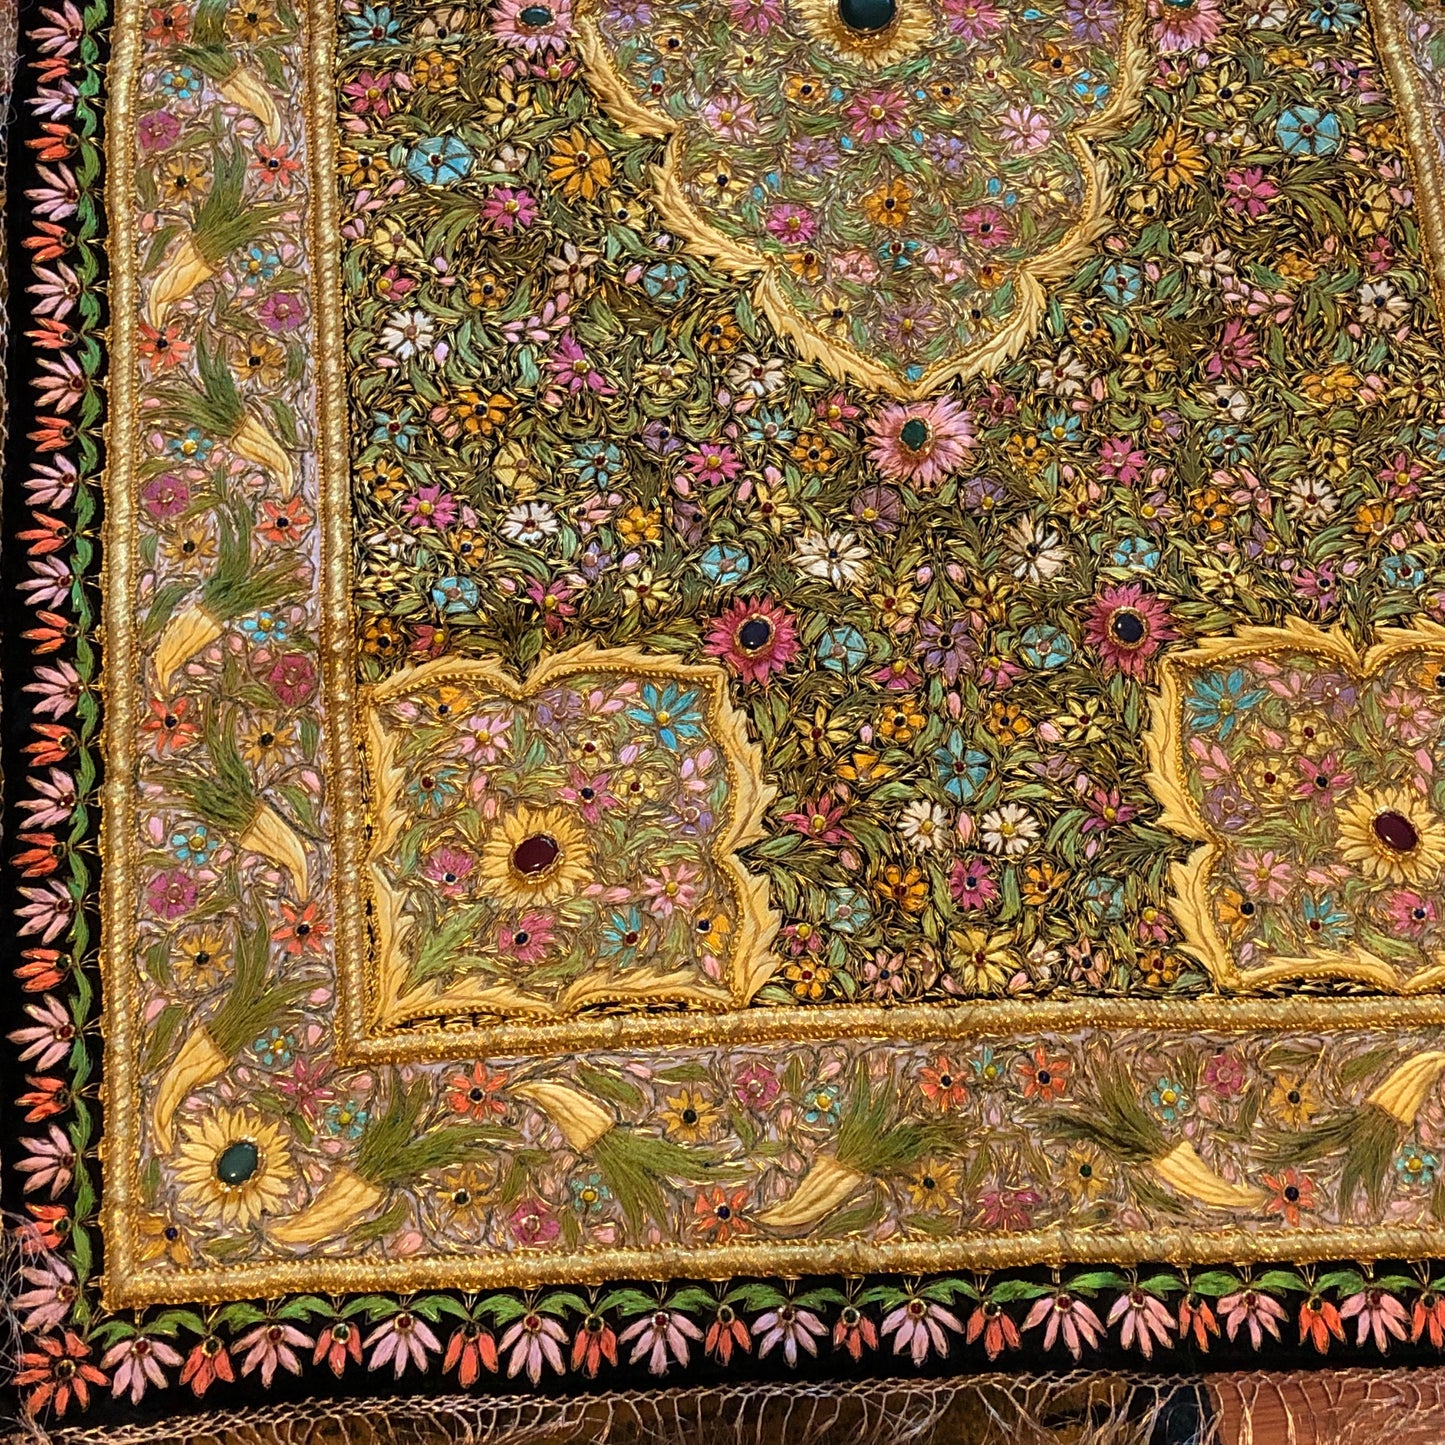 Large Handcrafted Zardozi Royal Tapestry with Semi-Precious Stones